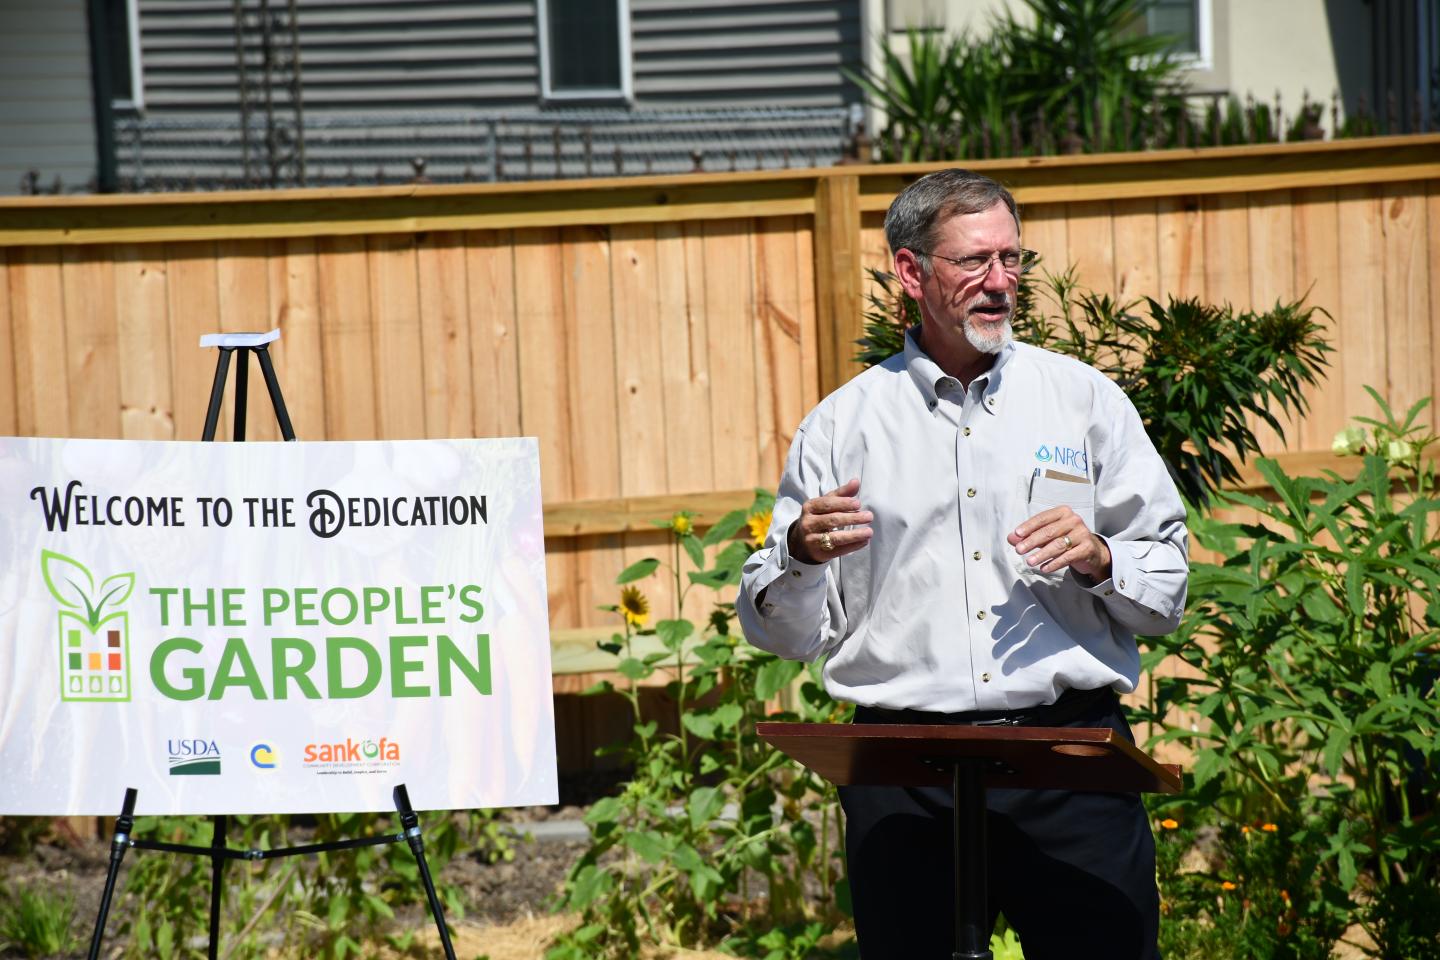 Louisiana State Conservationist Chad Kacir presenting at People's Garden Dedication